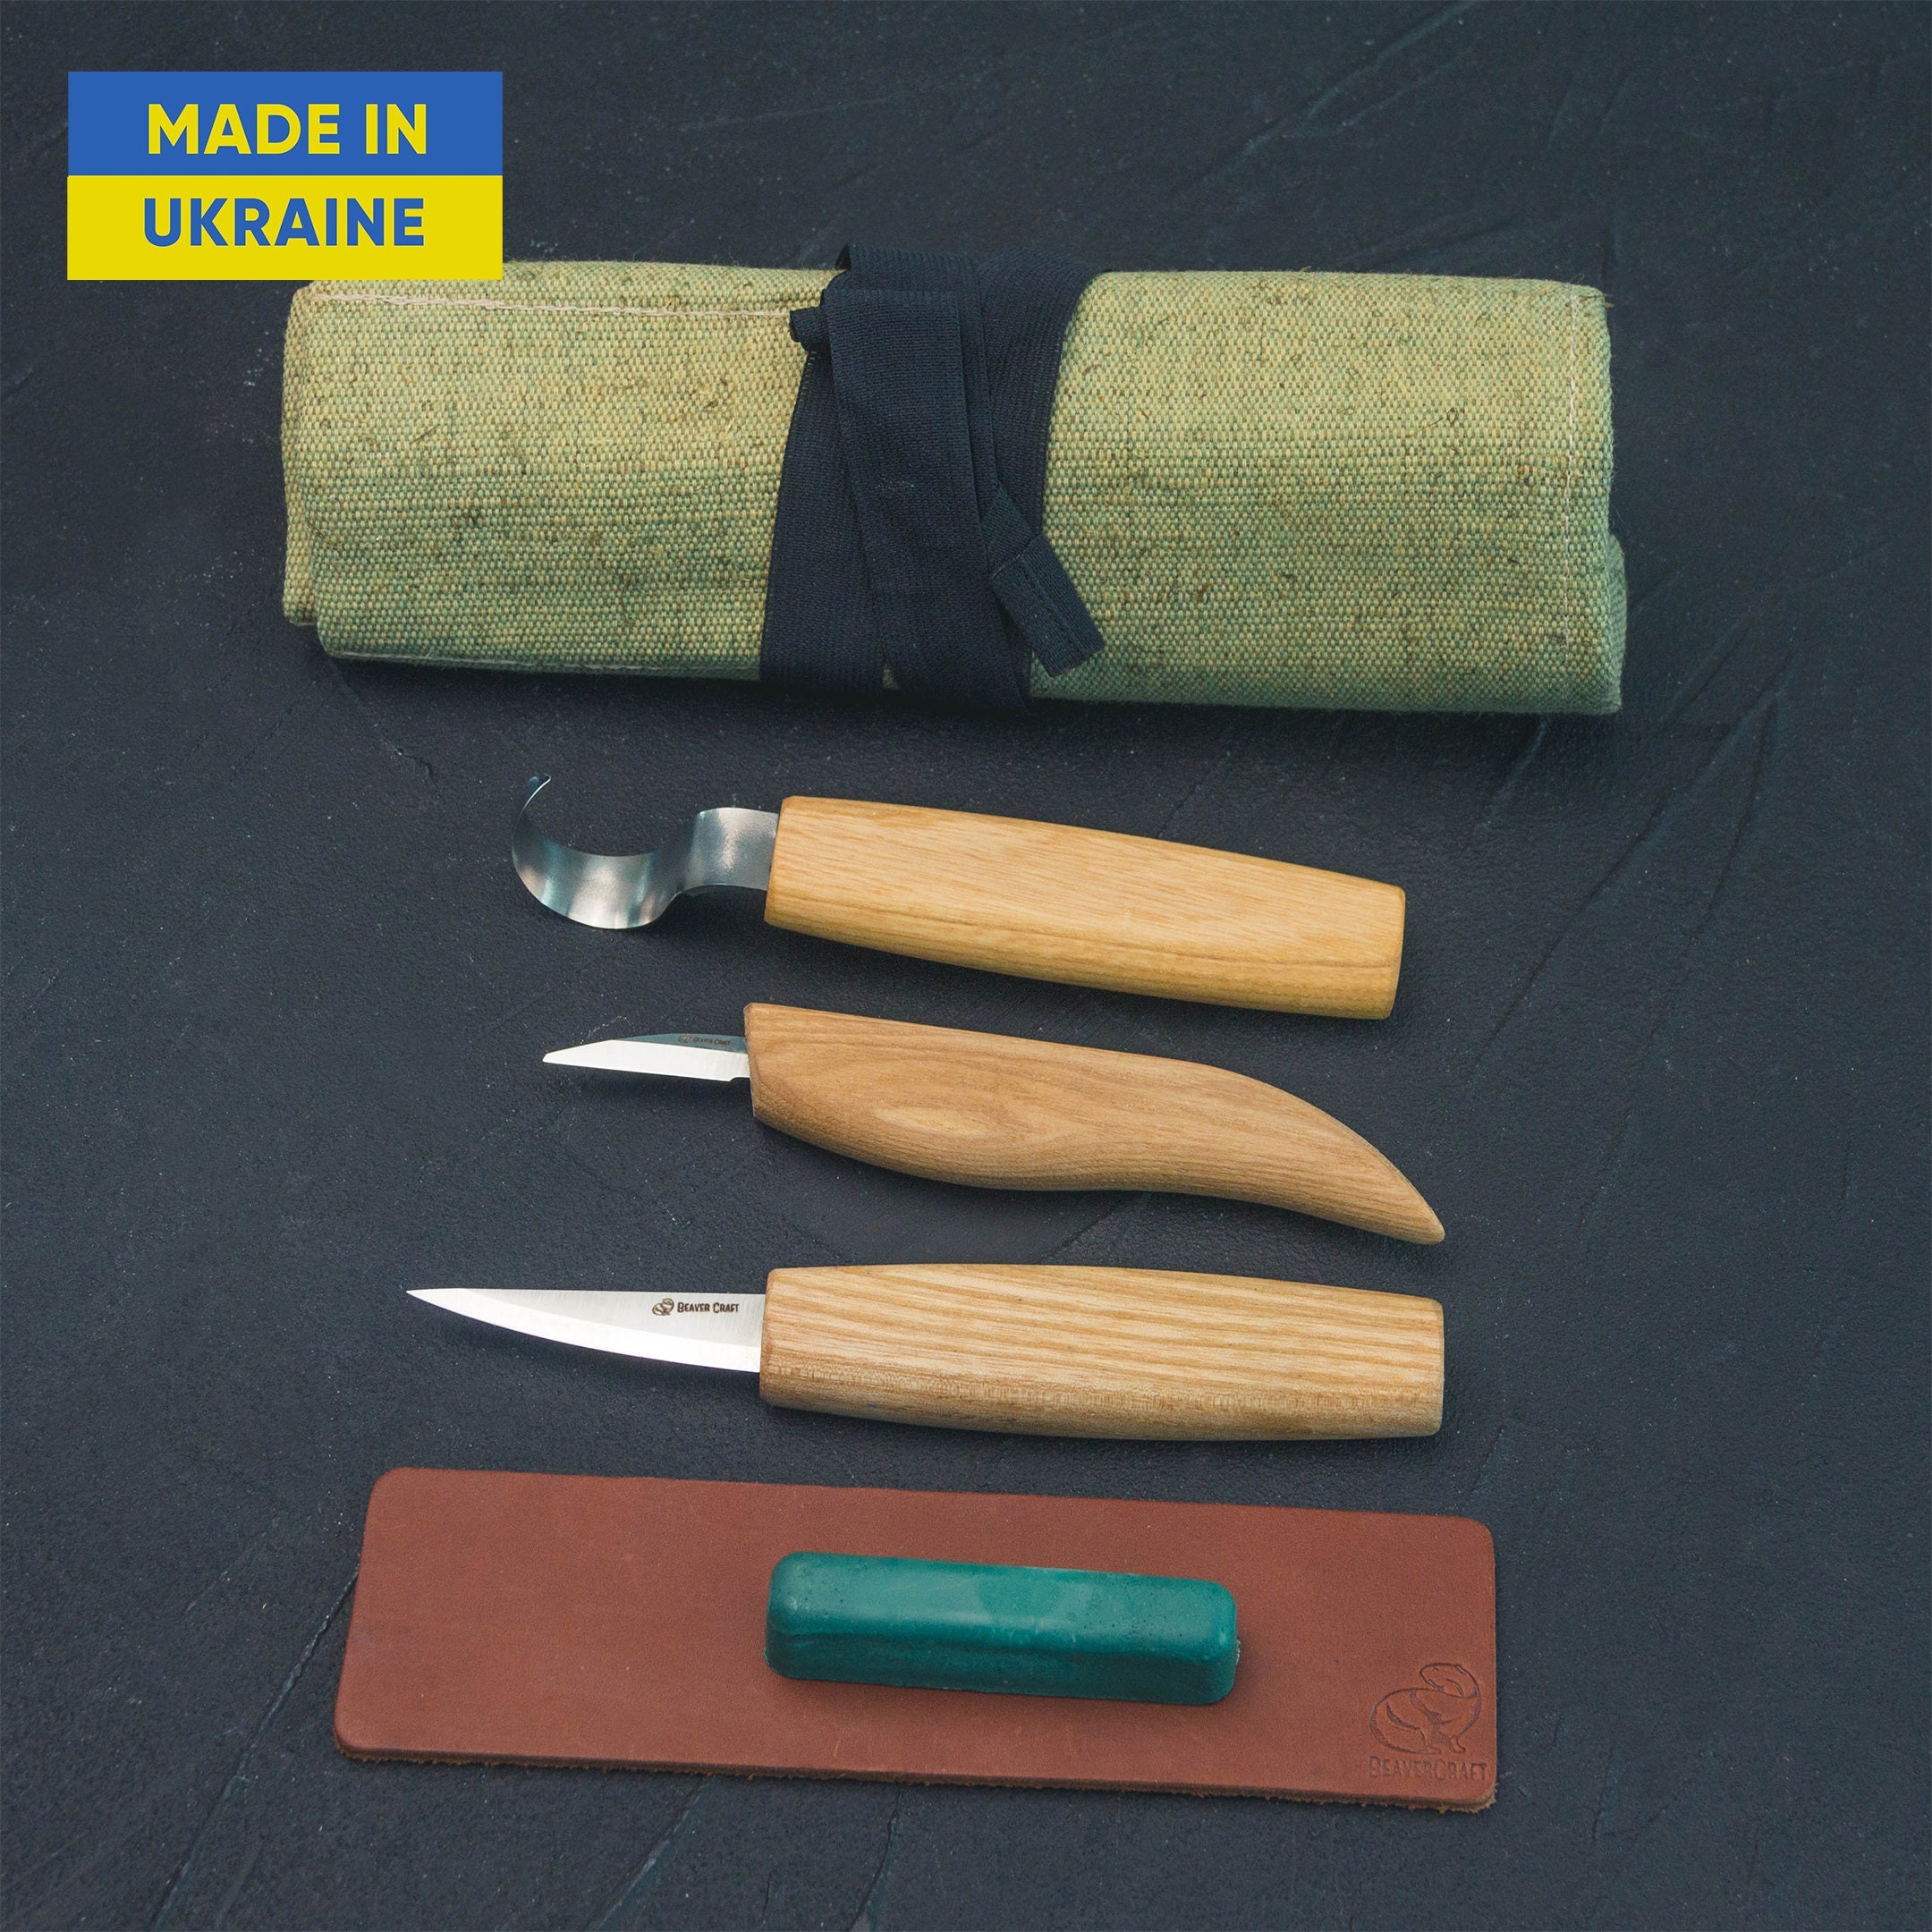 Chip Carving Knives, Wood Carving Set, Small chisel - The Spoon Crank